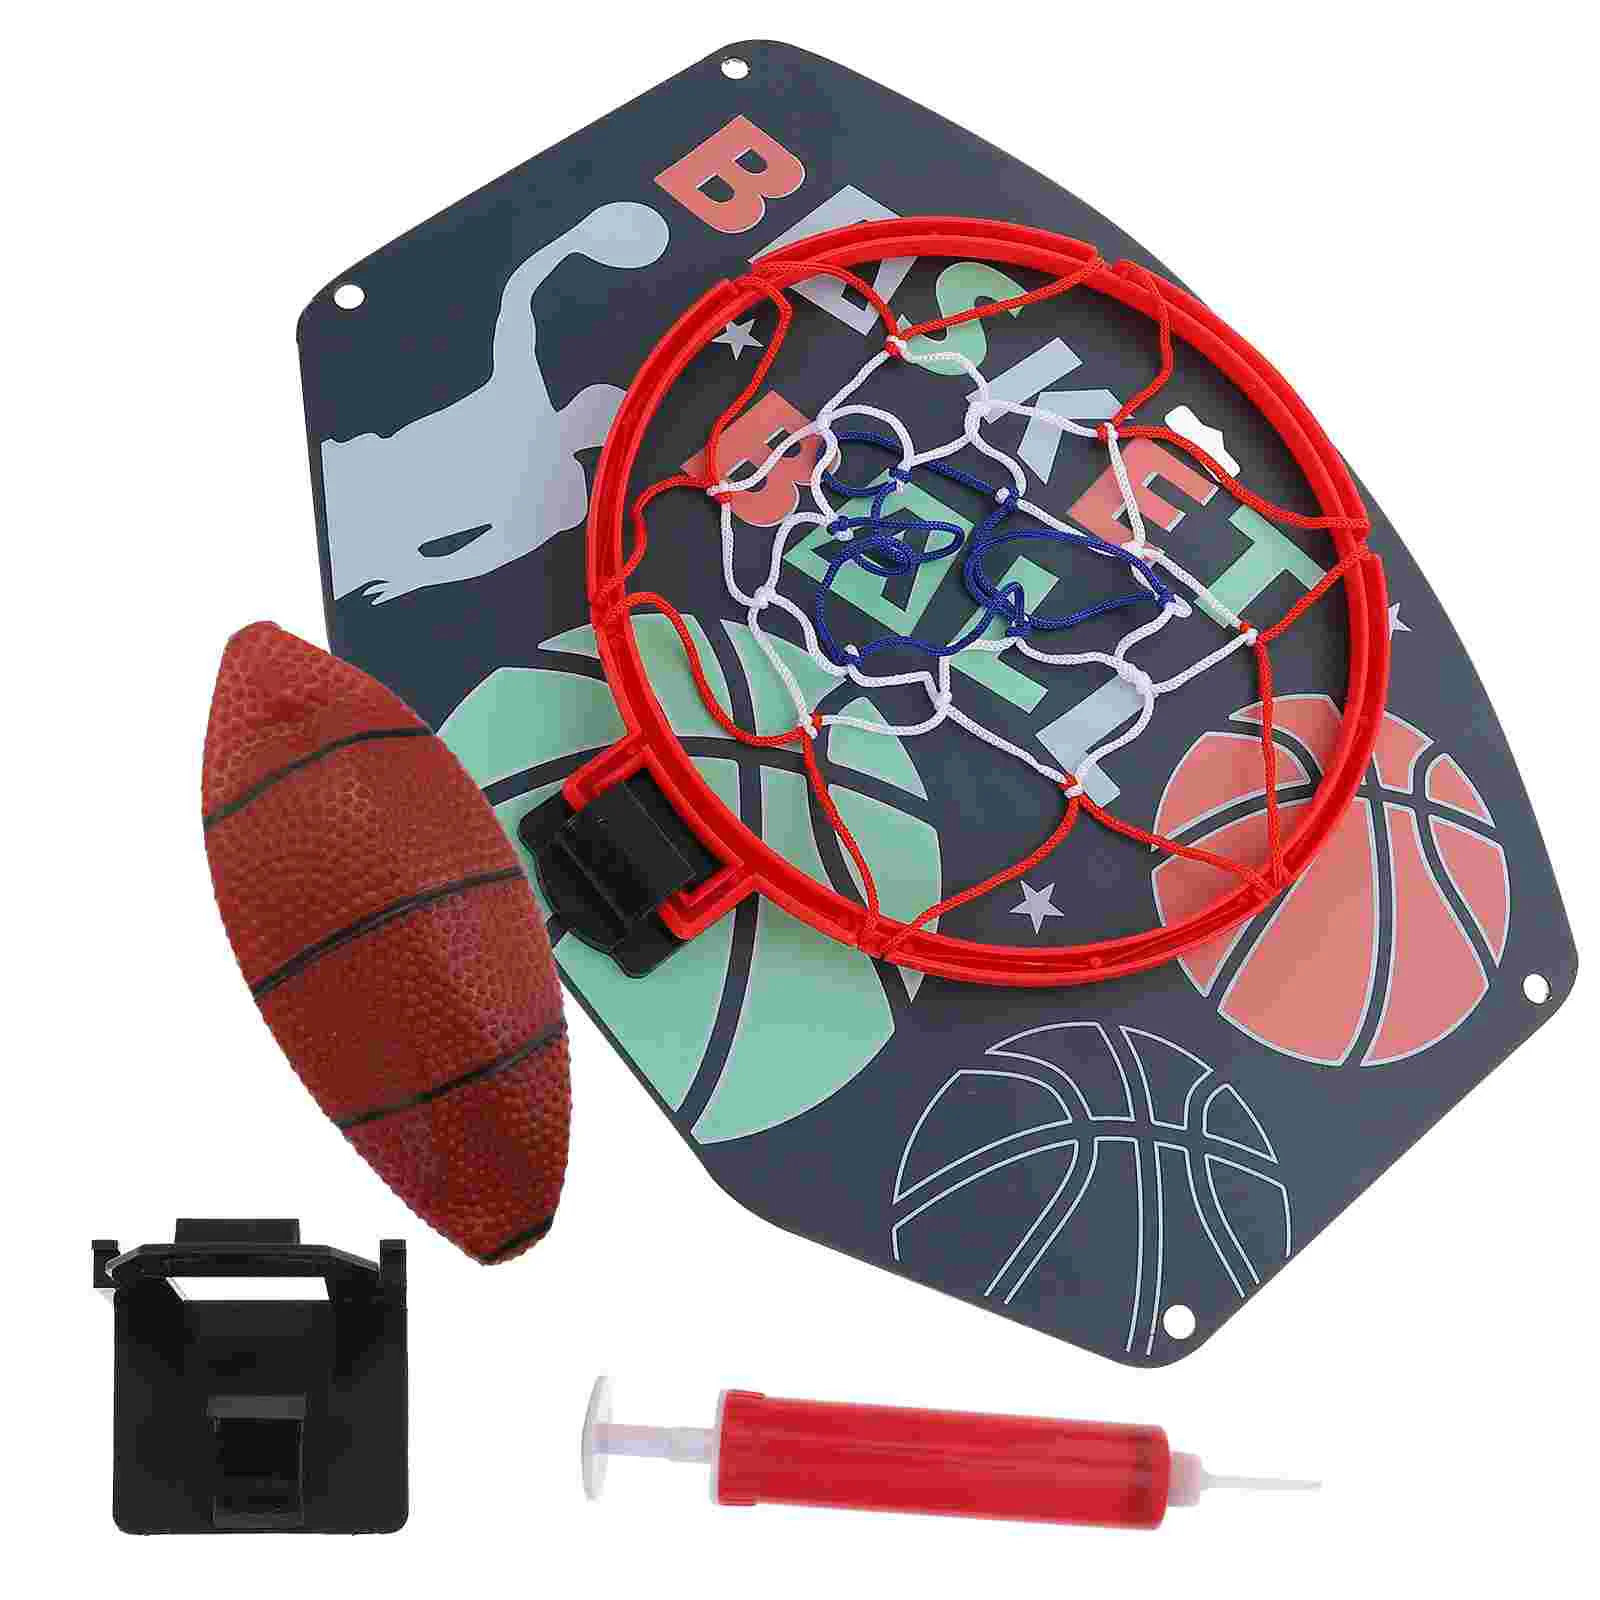 

Toys Basketball Indoor Game Exercising Shooting Hoop Toy Playthings Set Wall Mounted Clip Sports Sport Kids Goal